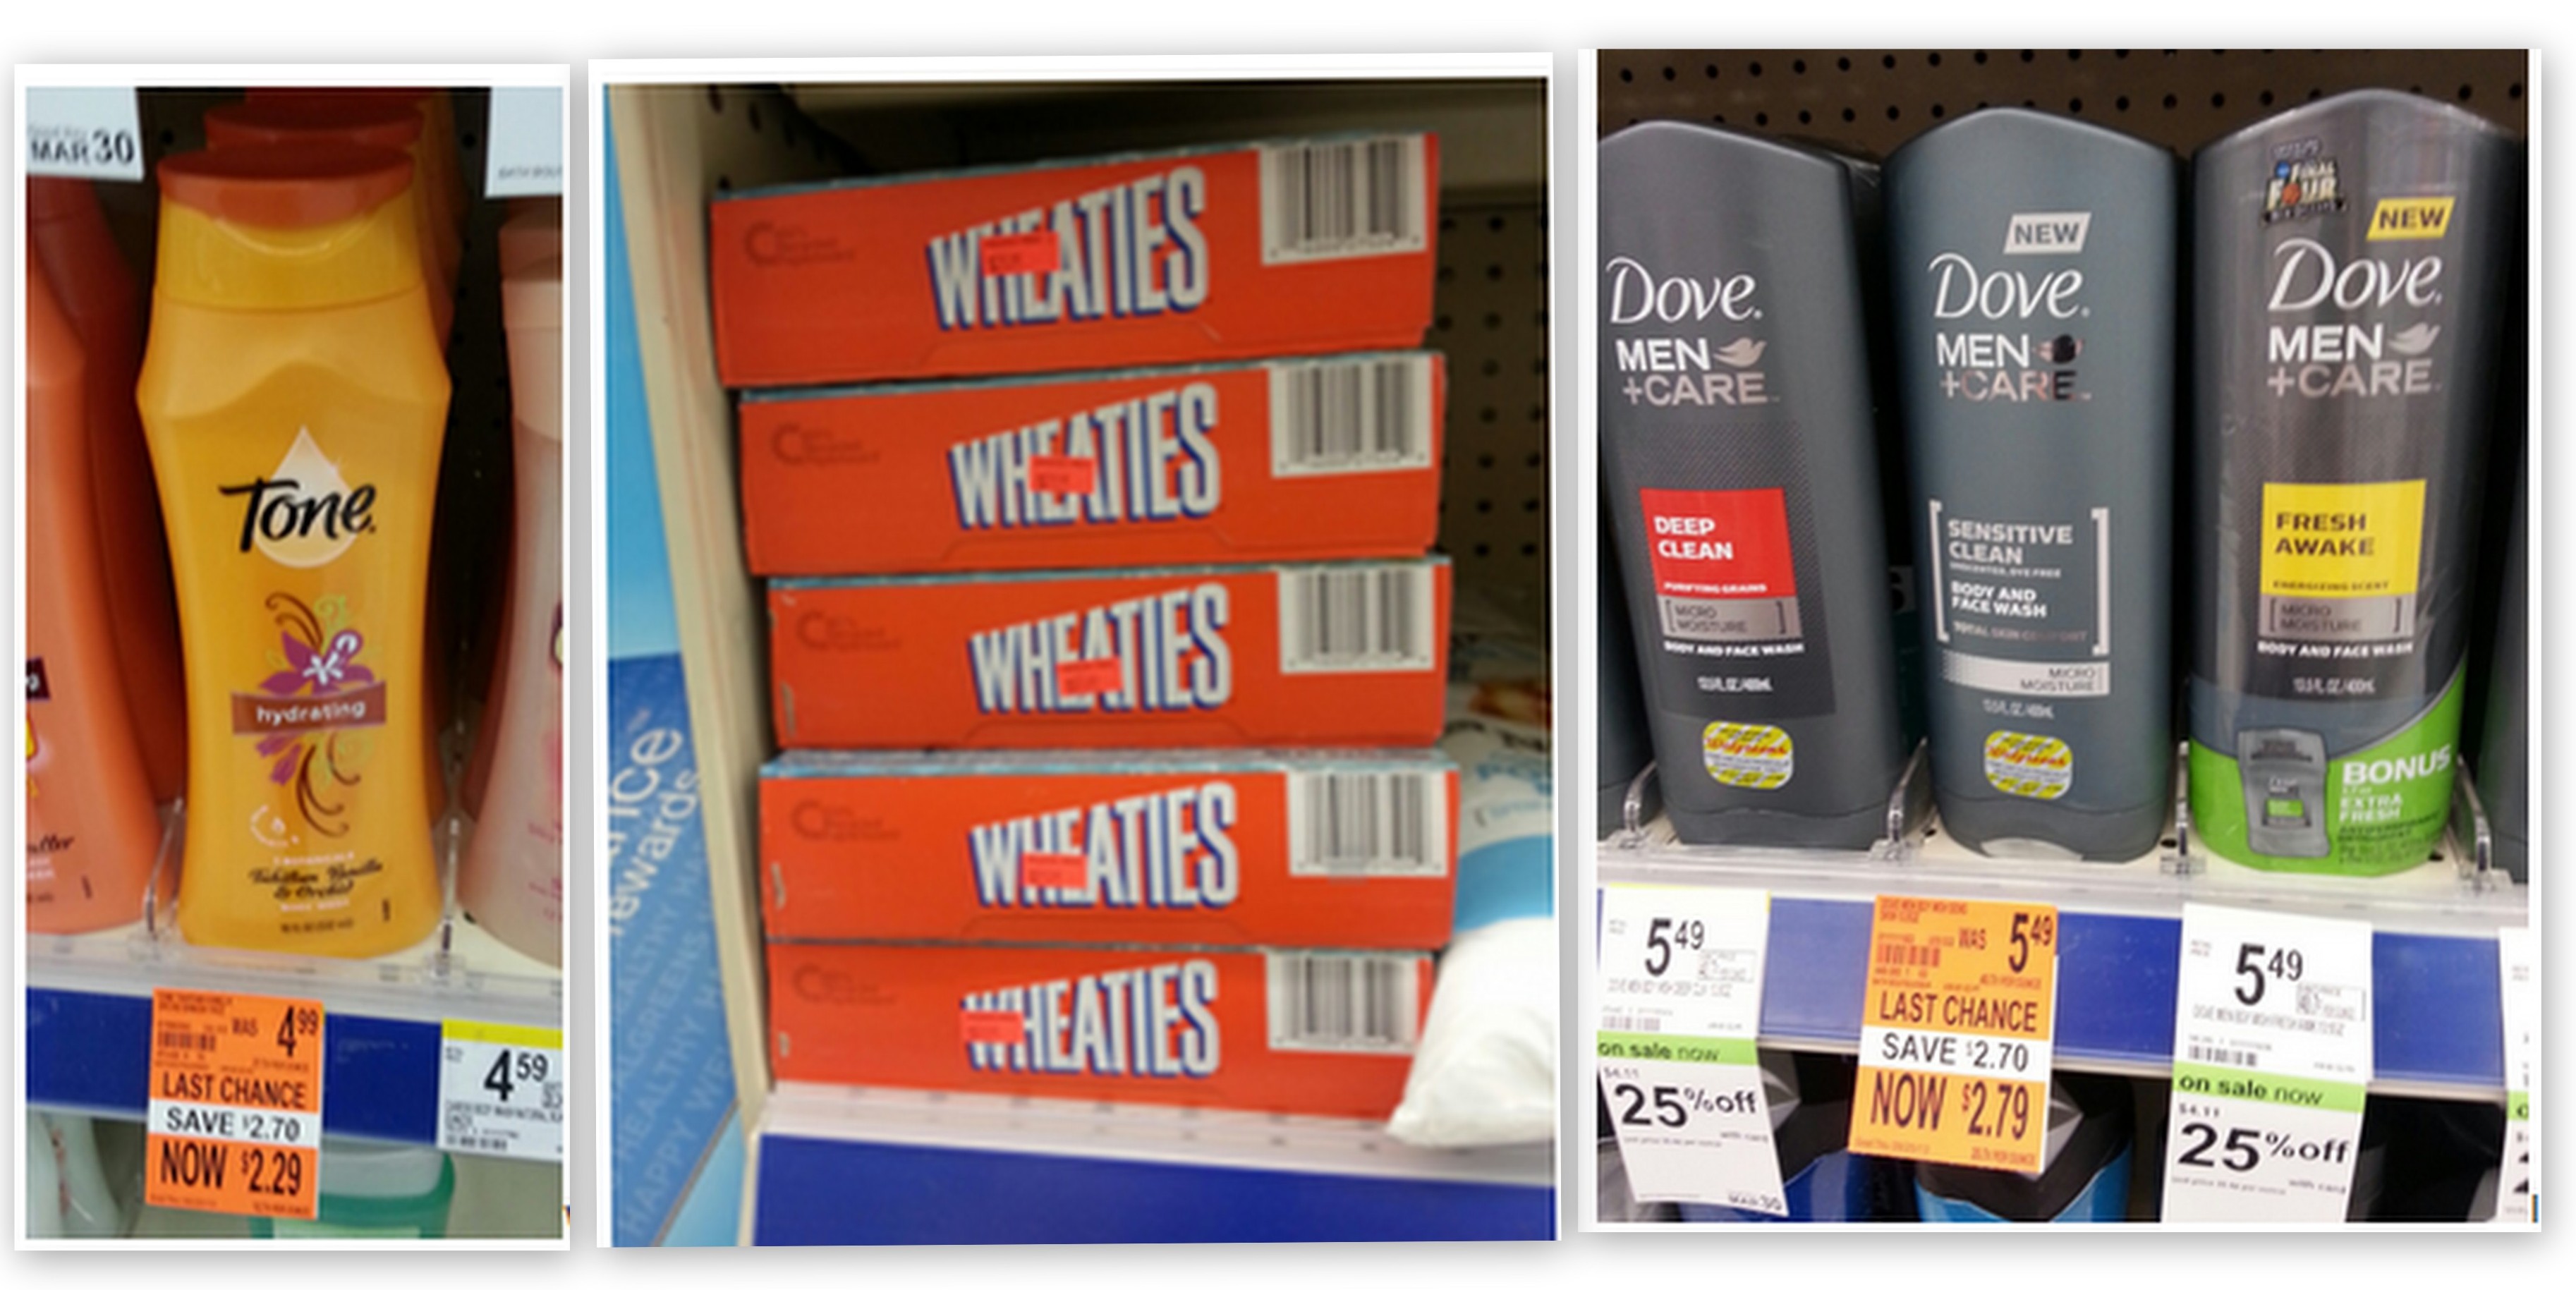 Walgreens Clearance Deals (May Be Regional)